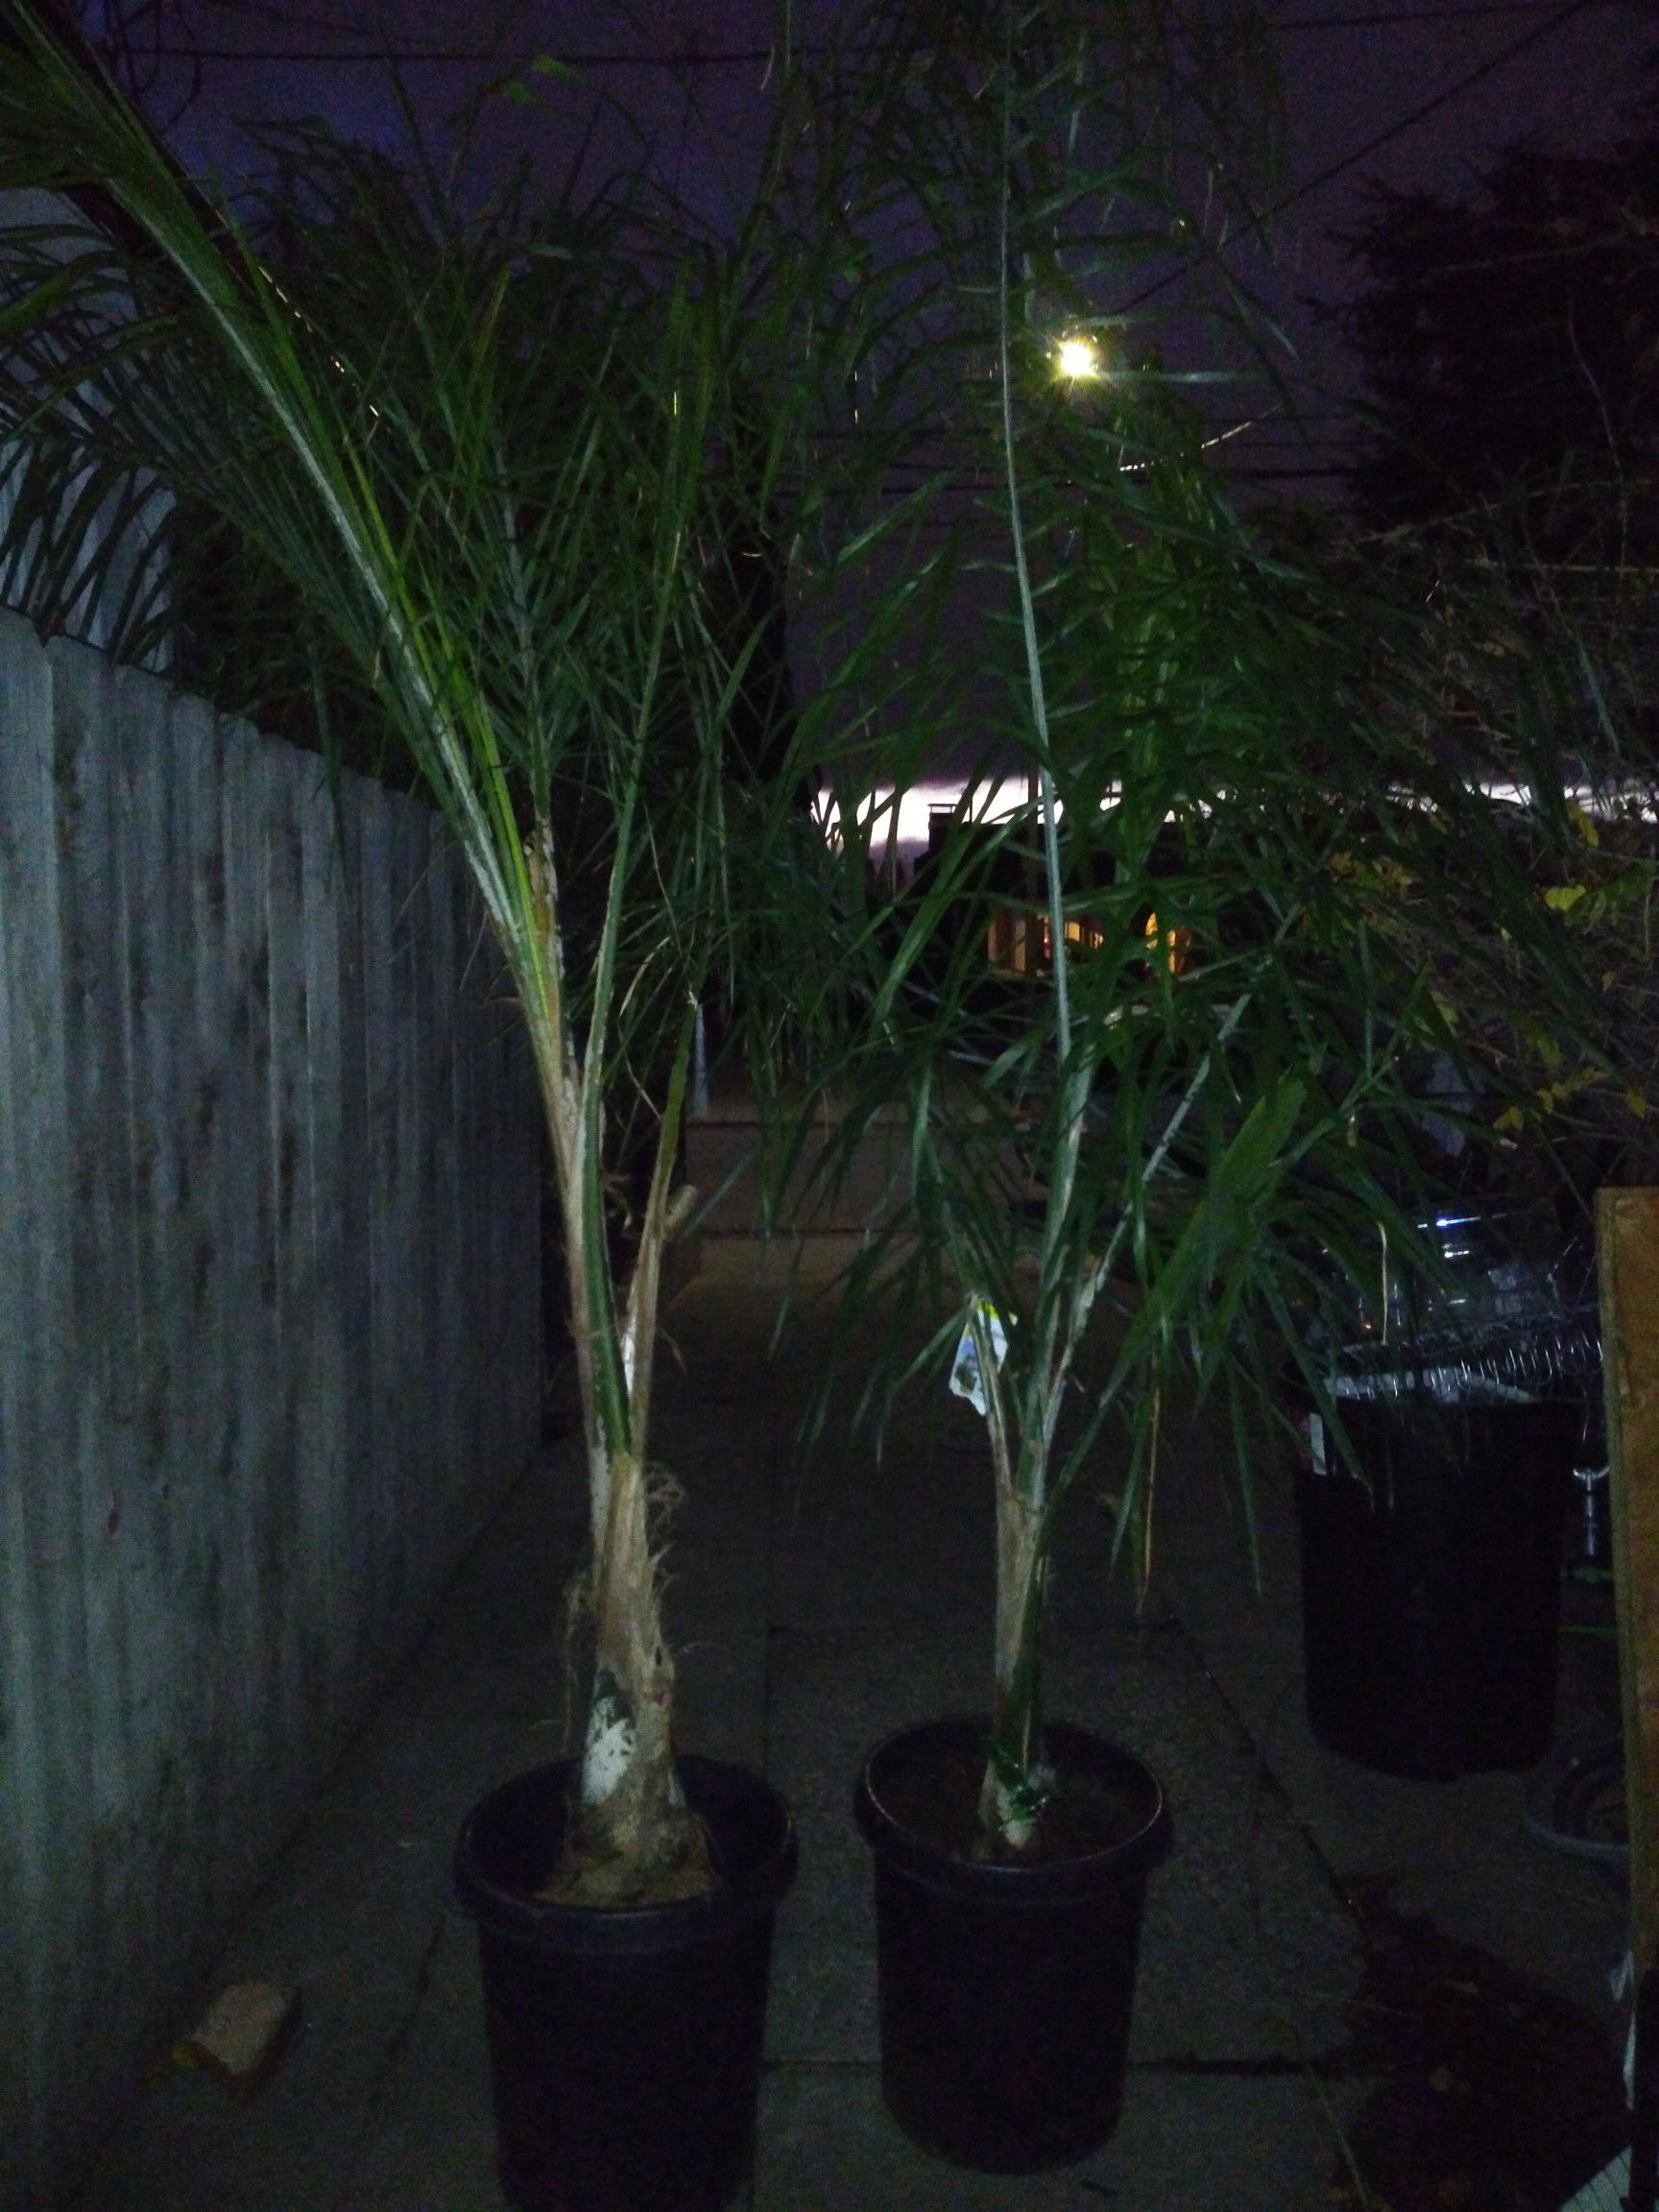 Two queen palms 25$each